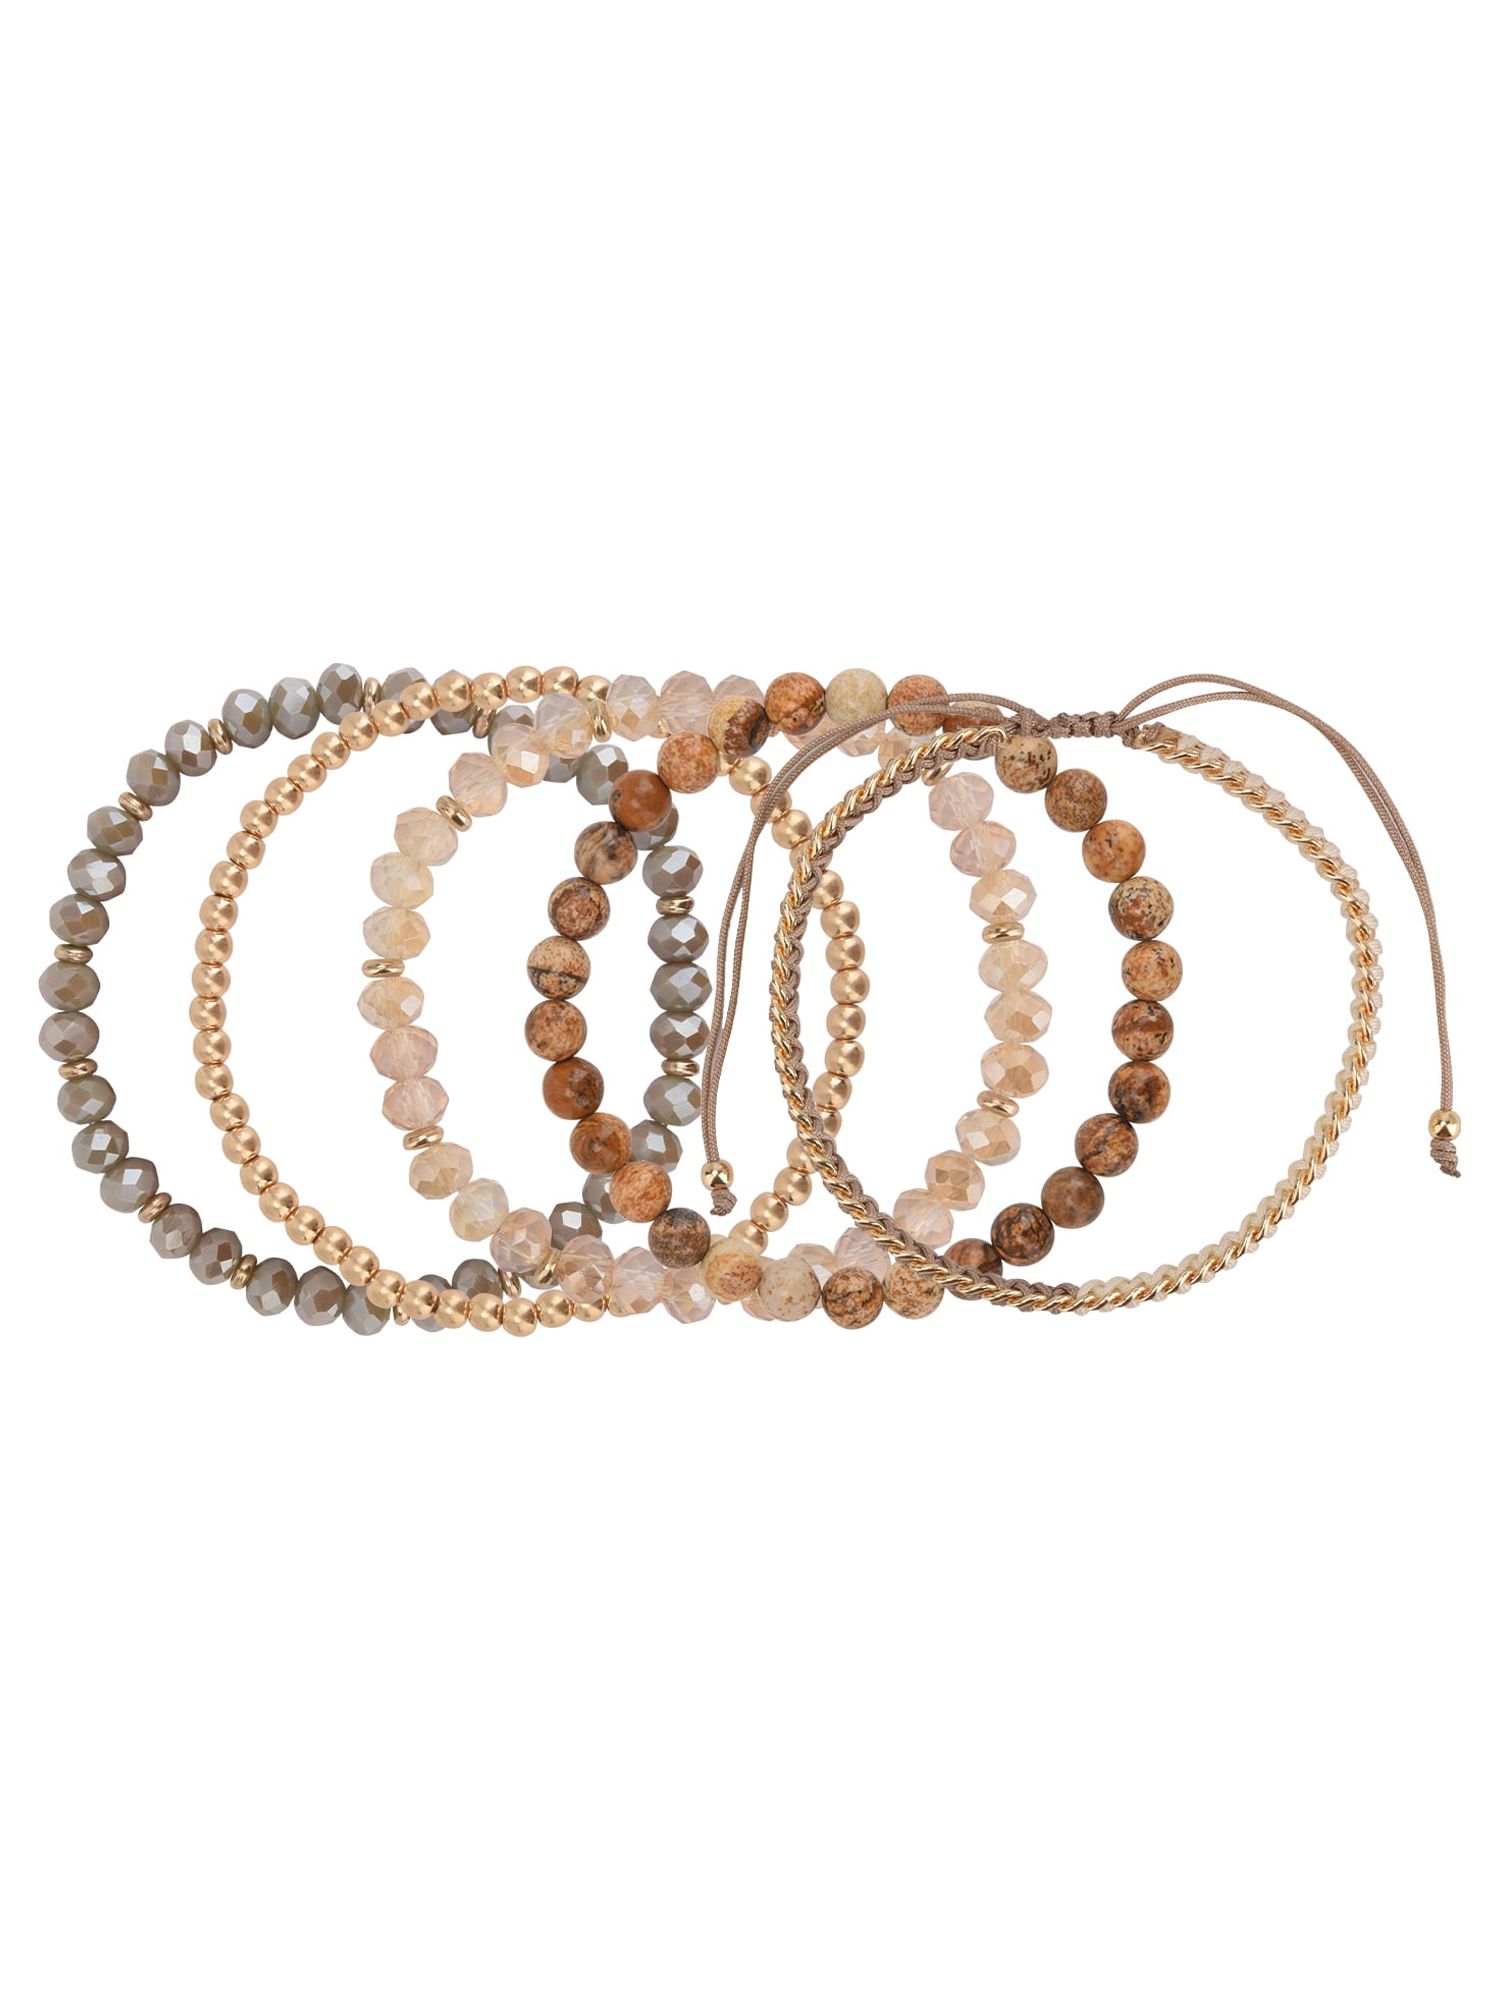 The Pioneer Woman - Women's Jewelry, Soft Gold-tone Bracelet Set with Genuine Stone Beads - image 1 of 7